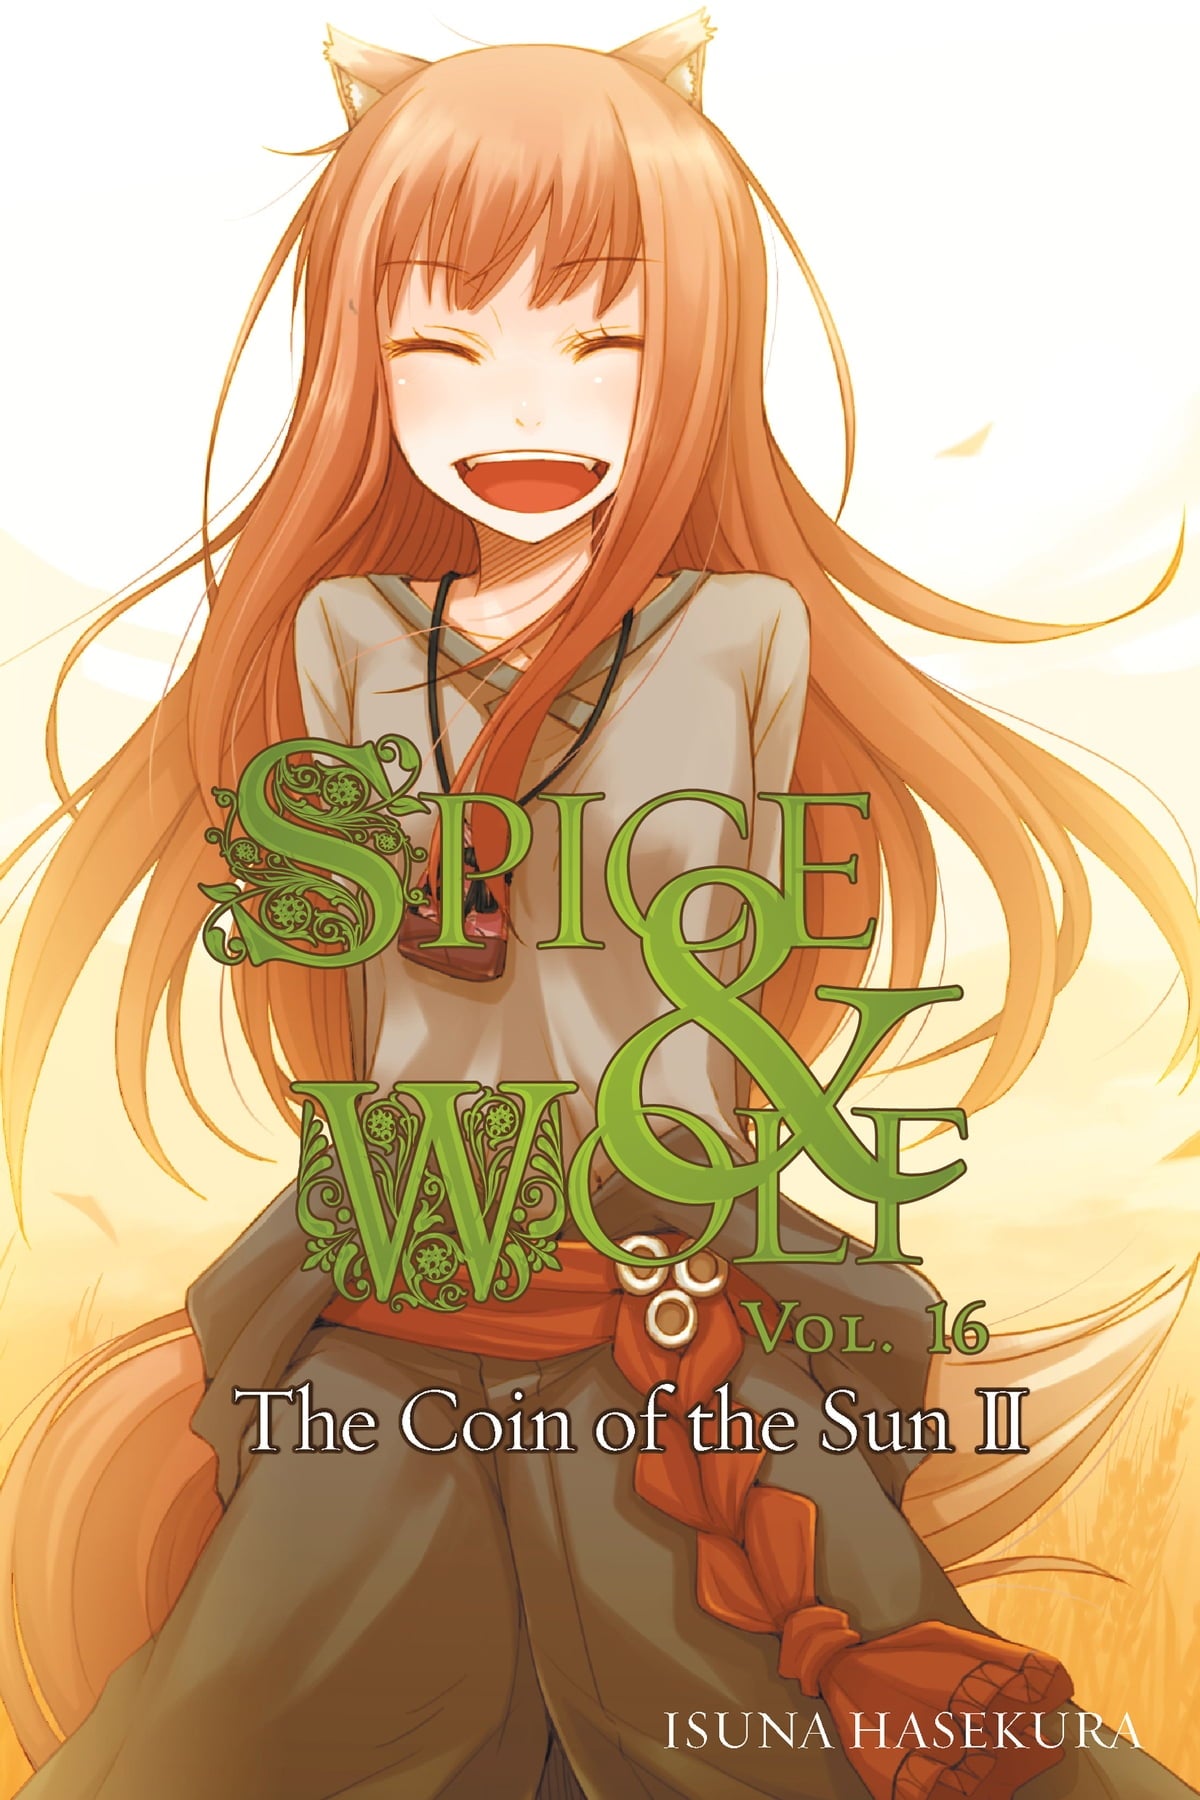 Spice and Wolf Vol. 16 (Light Novel): The Coin of the Sun II